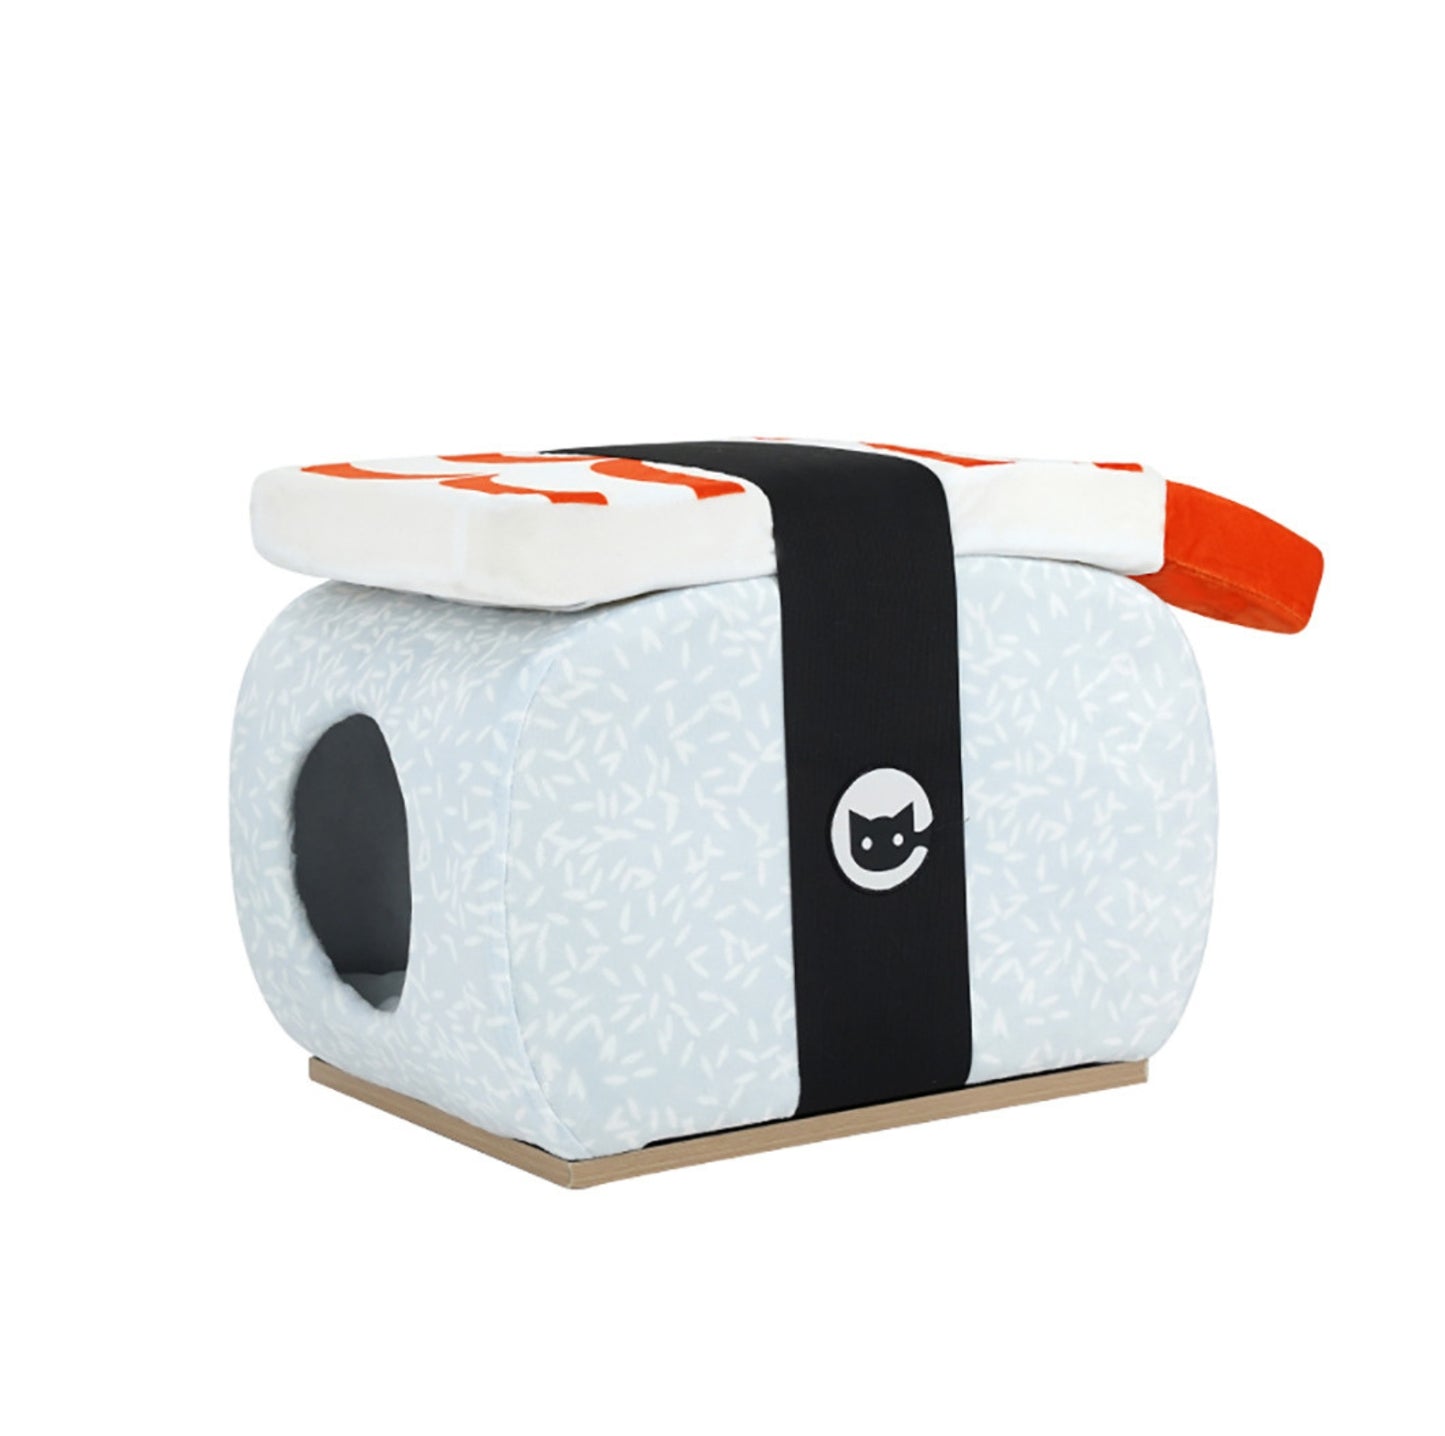 ZeZe Sushi-shaped Multi-functional Chair and Cat Bed